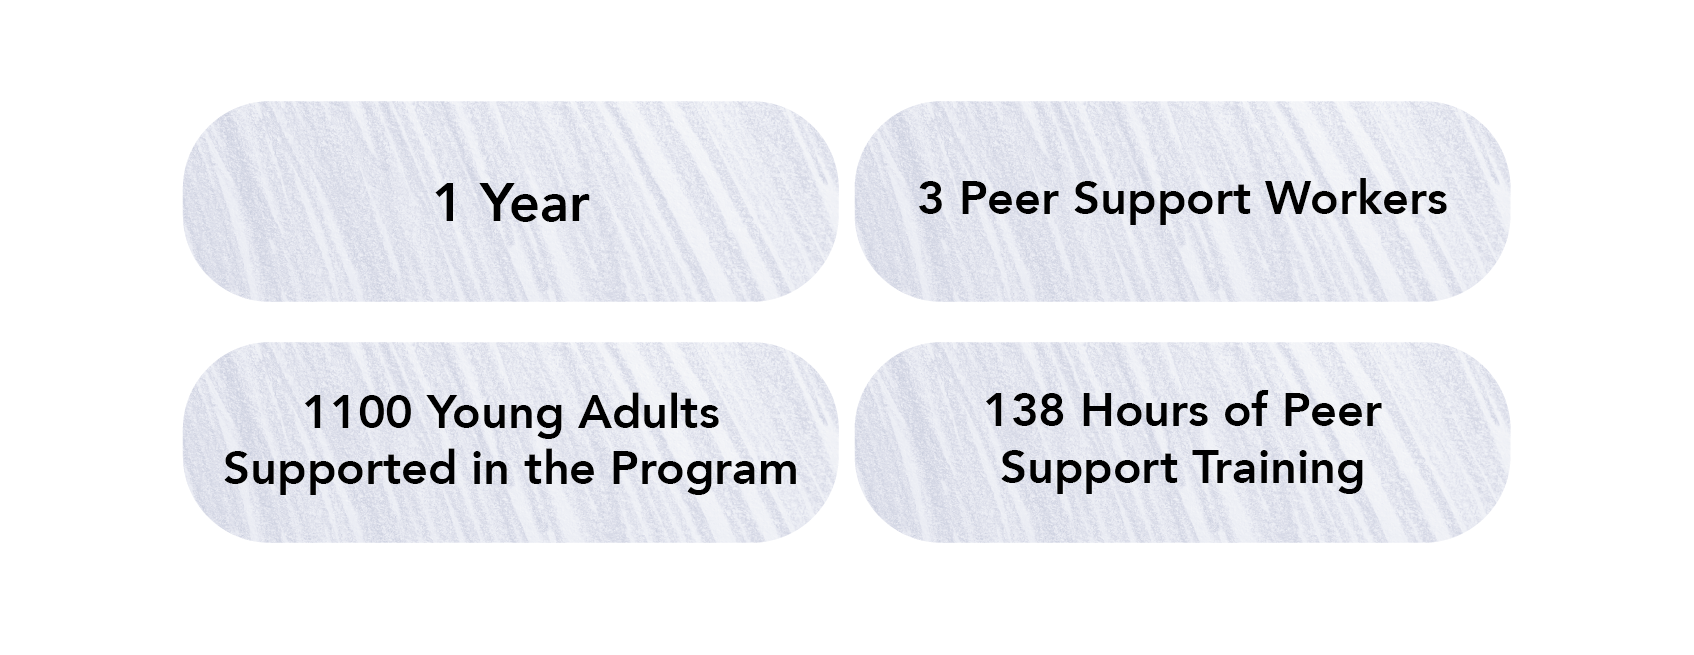 4 small purple texture boxes with statistics listed in each "1 year" "3 Peer Support Workers" "1100 Young Adults Supported in the Program" and "138 Hours of Peer Support Training"